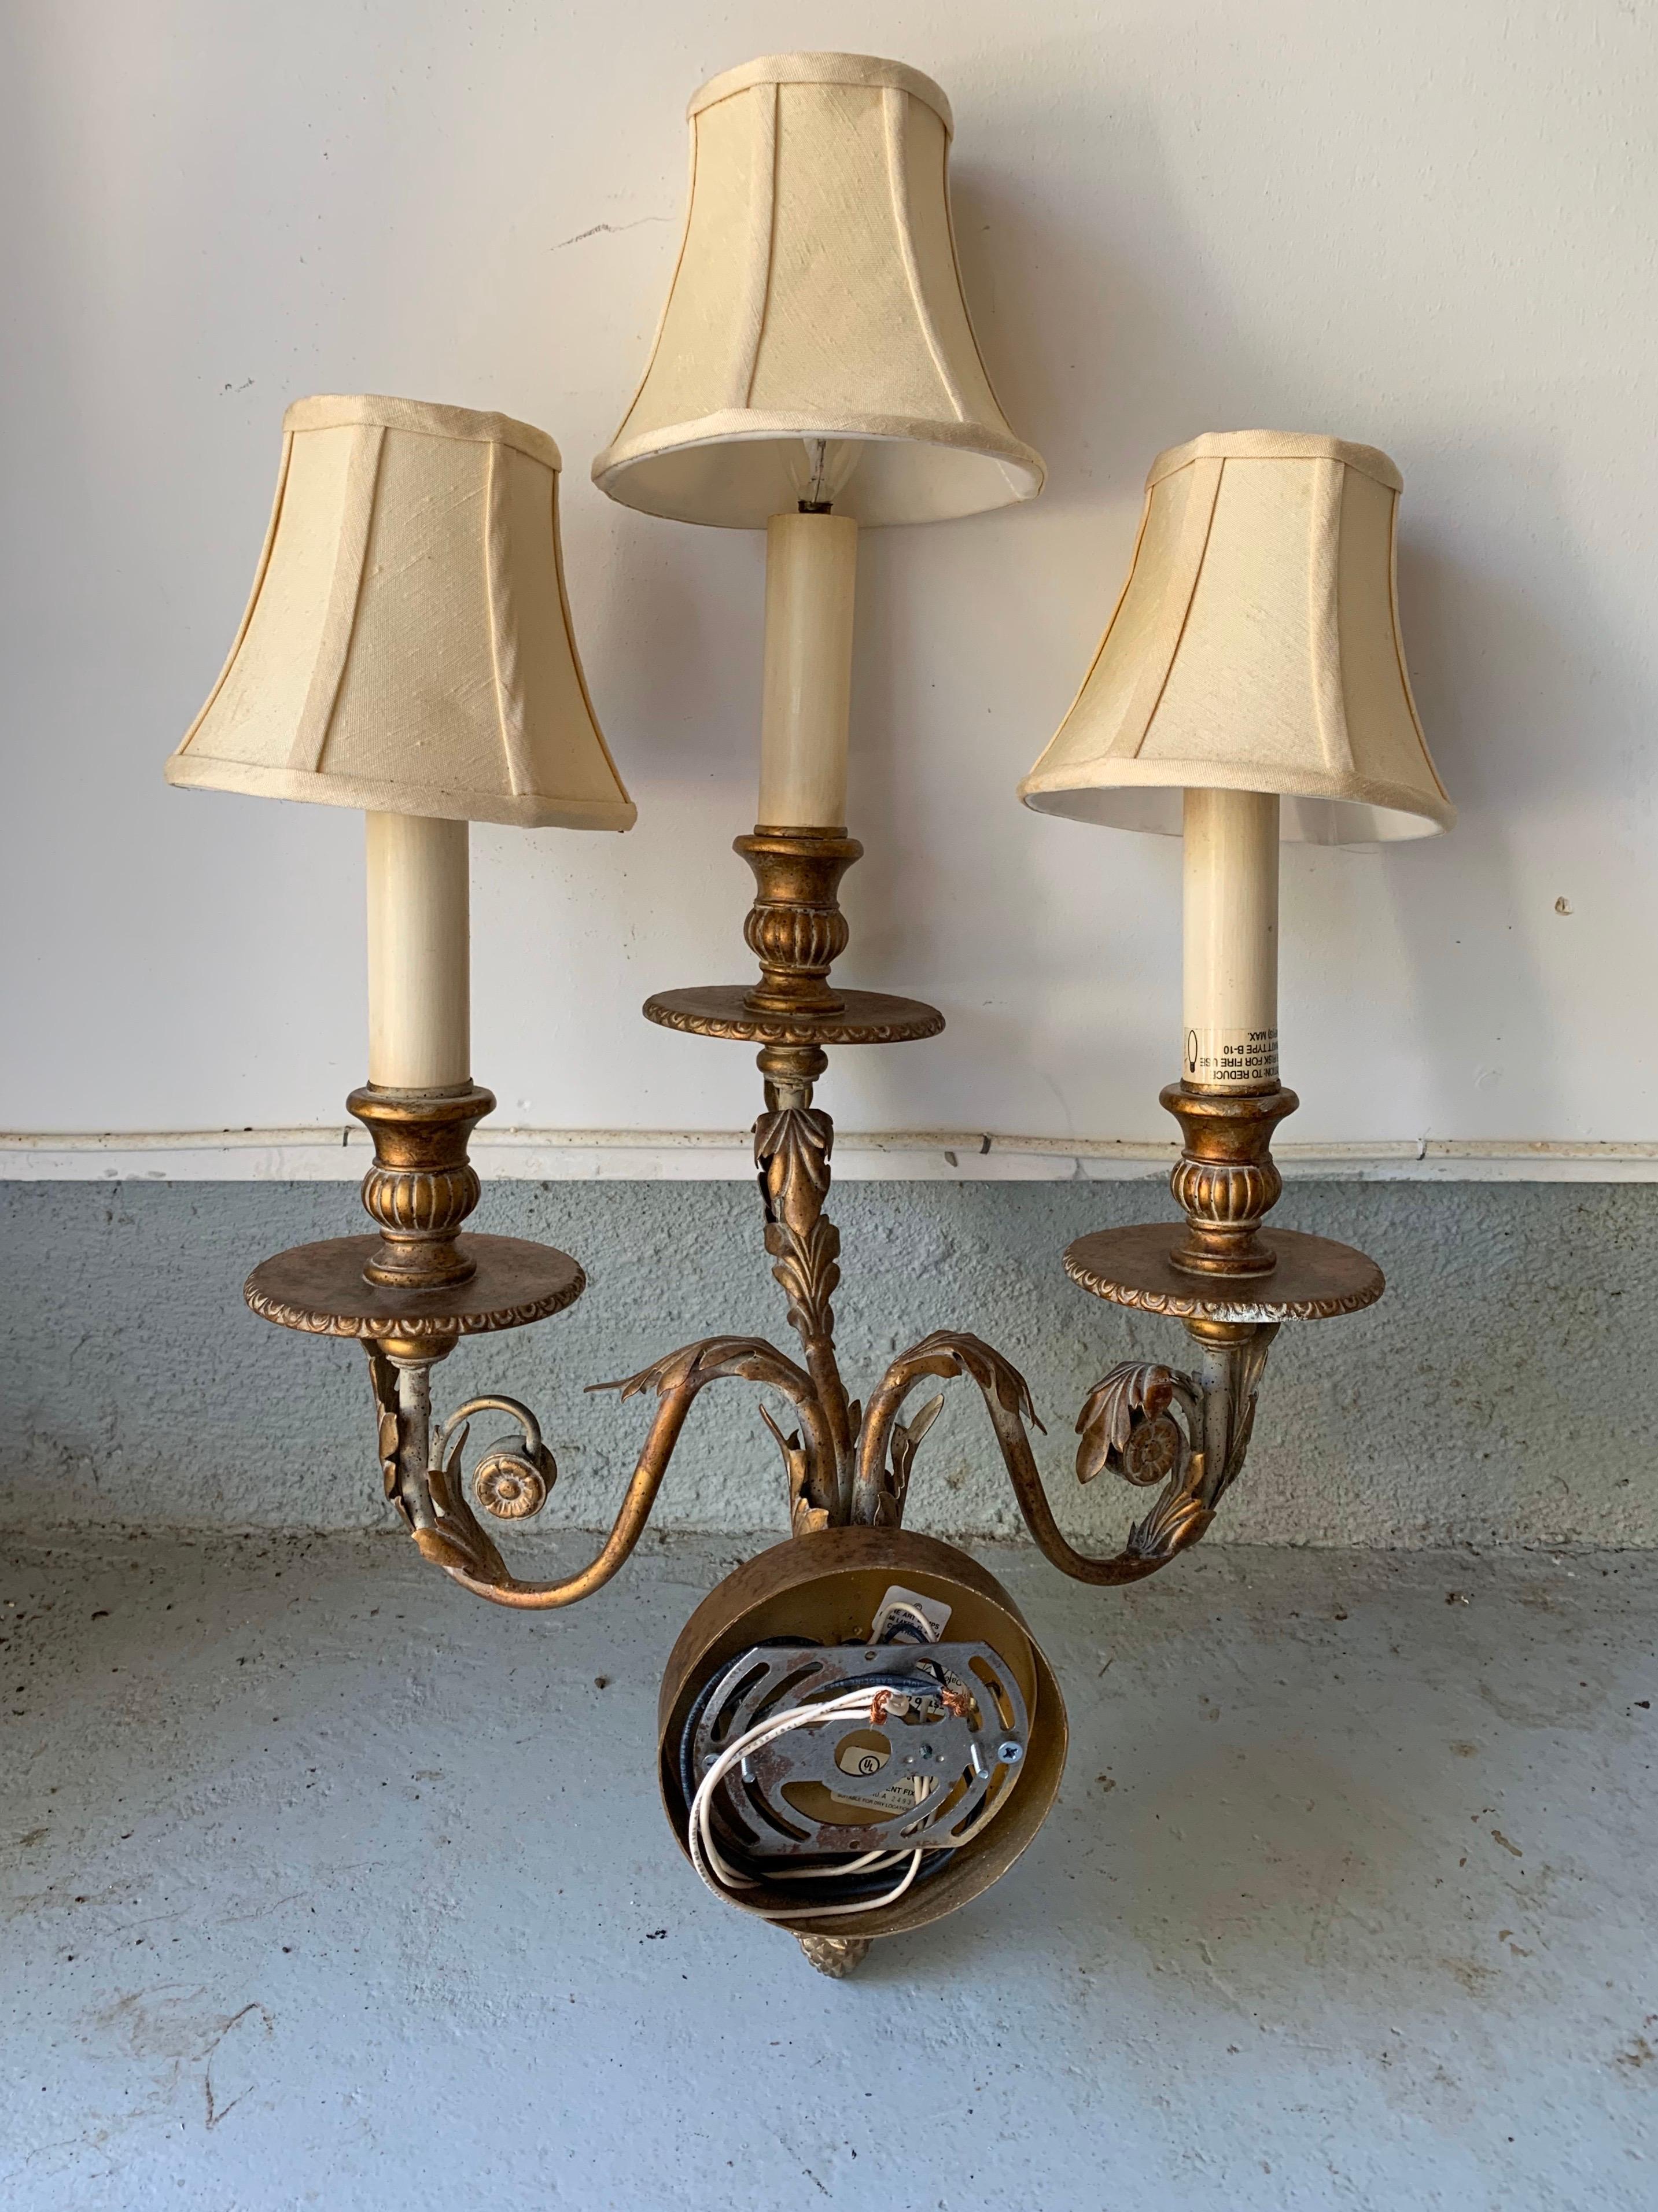 American the Fine Arts Company 3-Arm Brass Sconces & Shades - a Pair For Sale